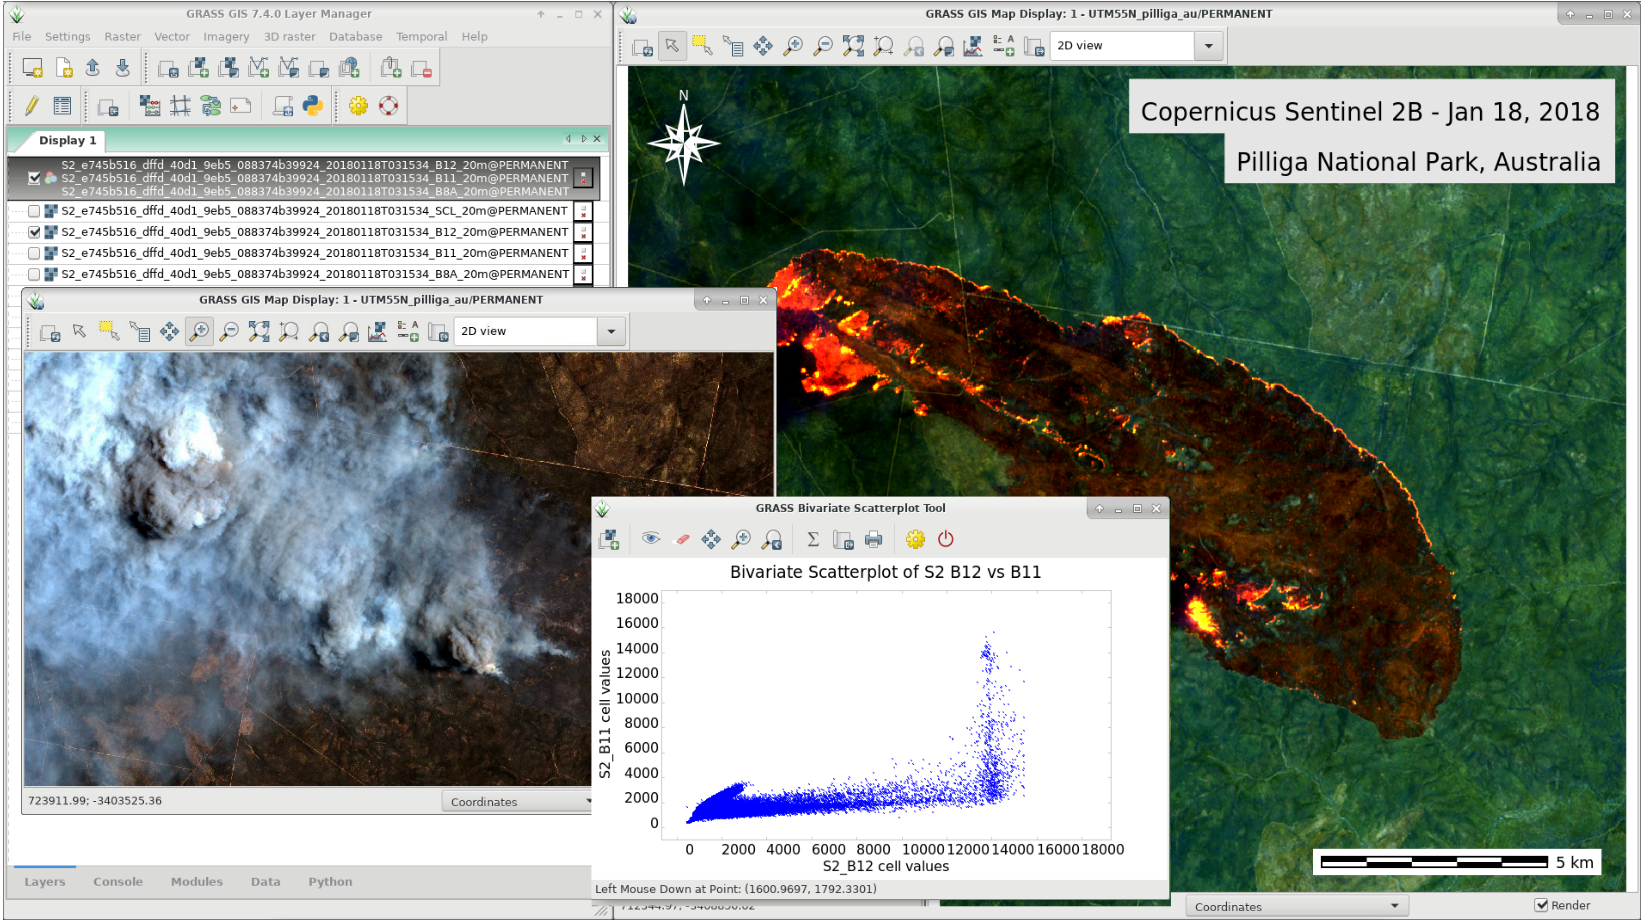 GRASS GIS 7.4.0: Wildfire in Australia, seen by
Sentinel-2B